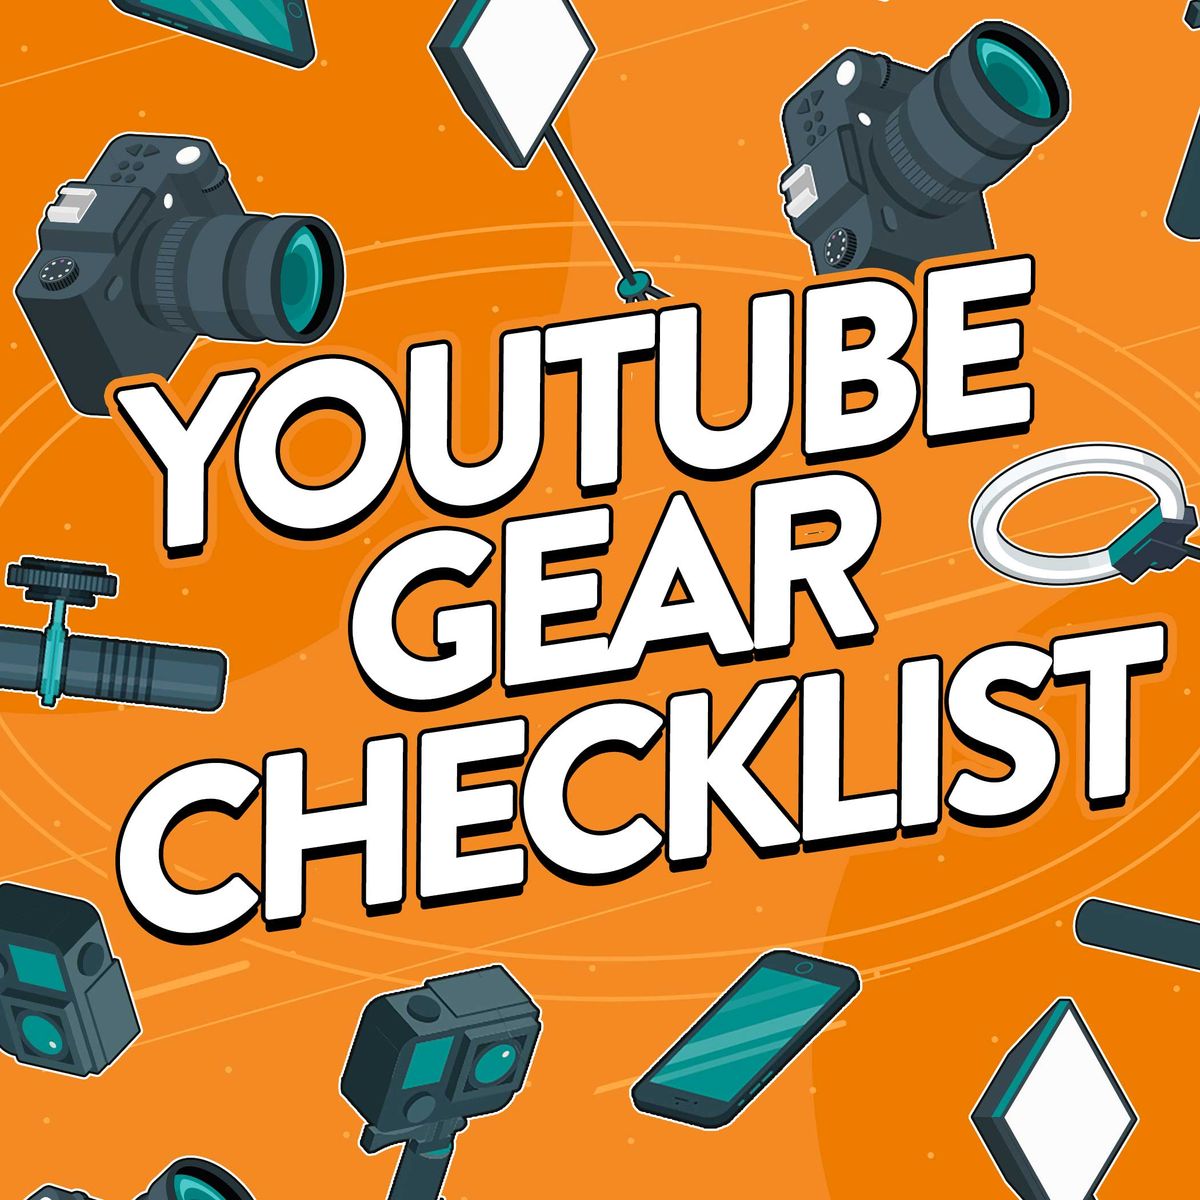 Illustration of different types of YouTube gear.